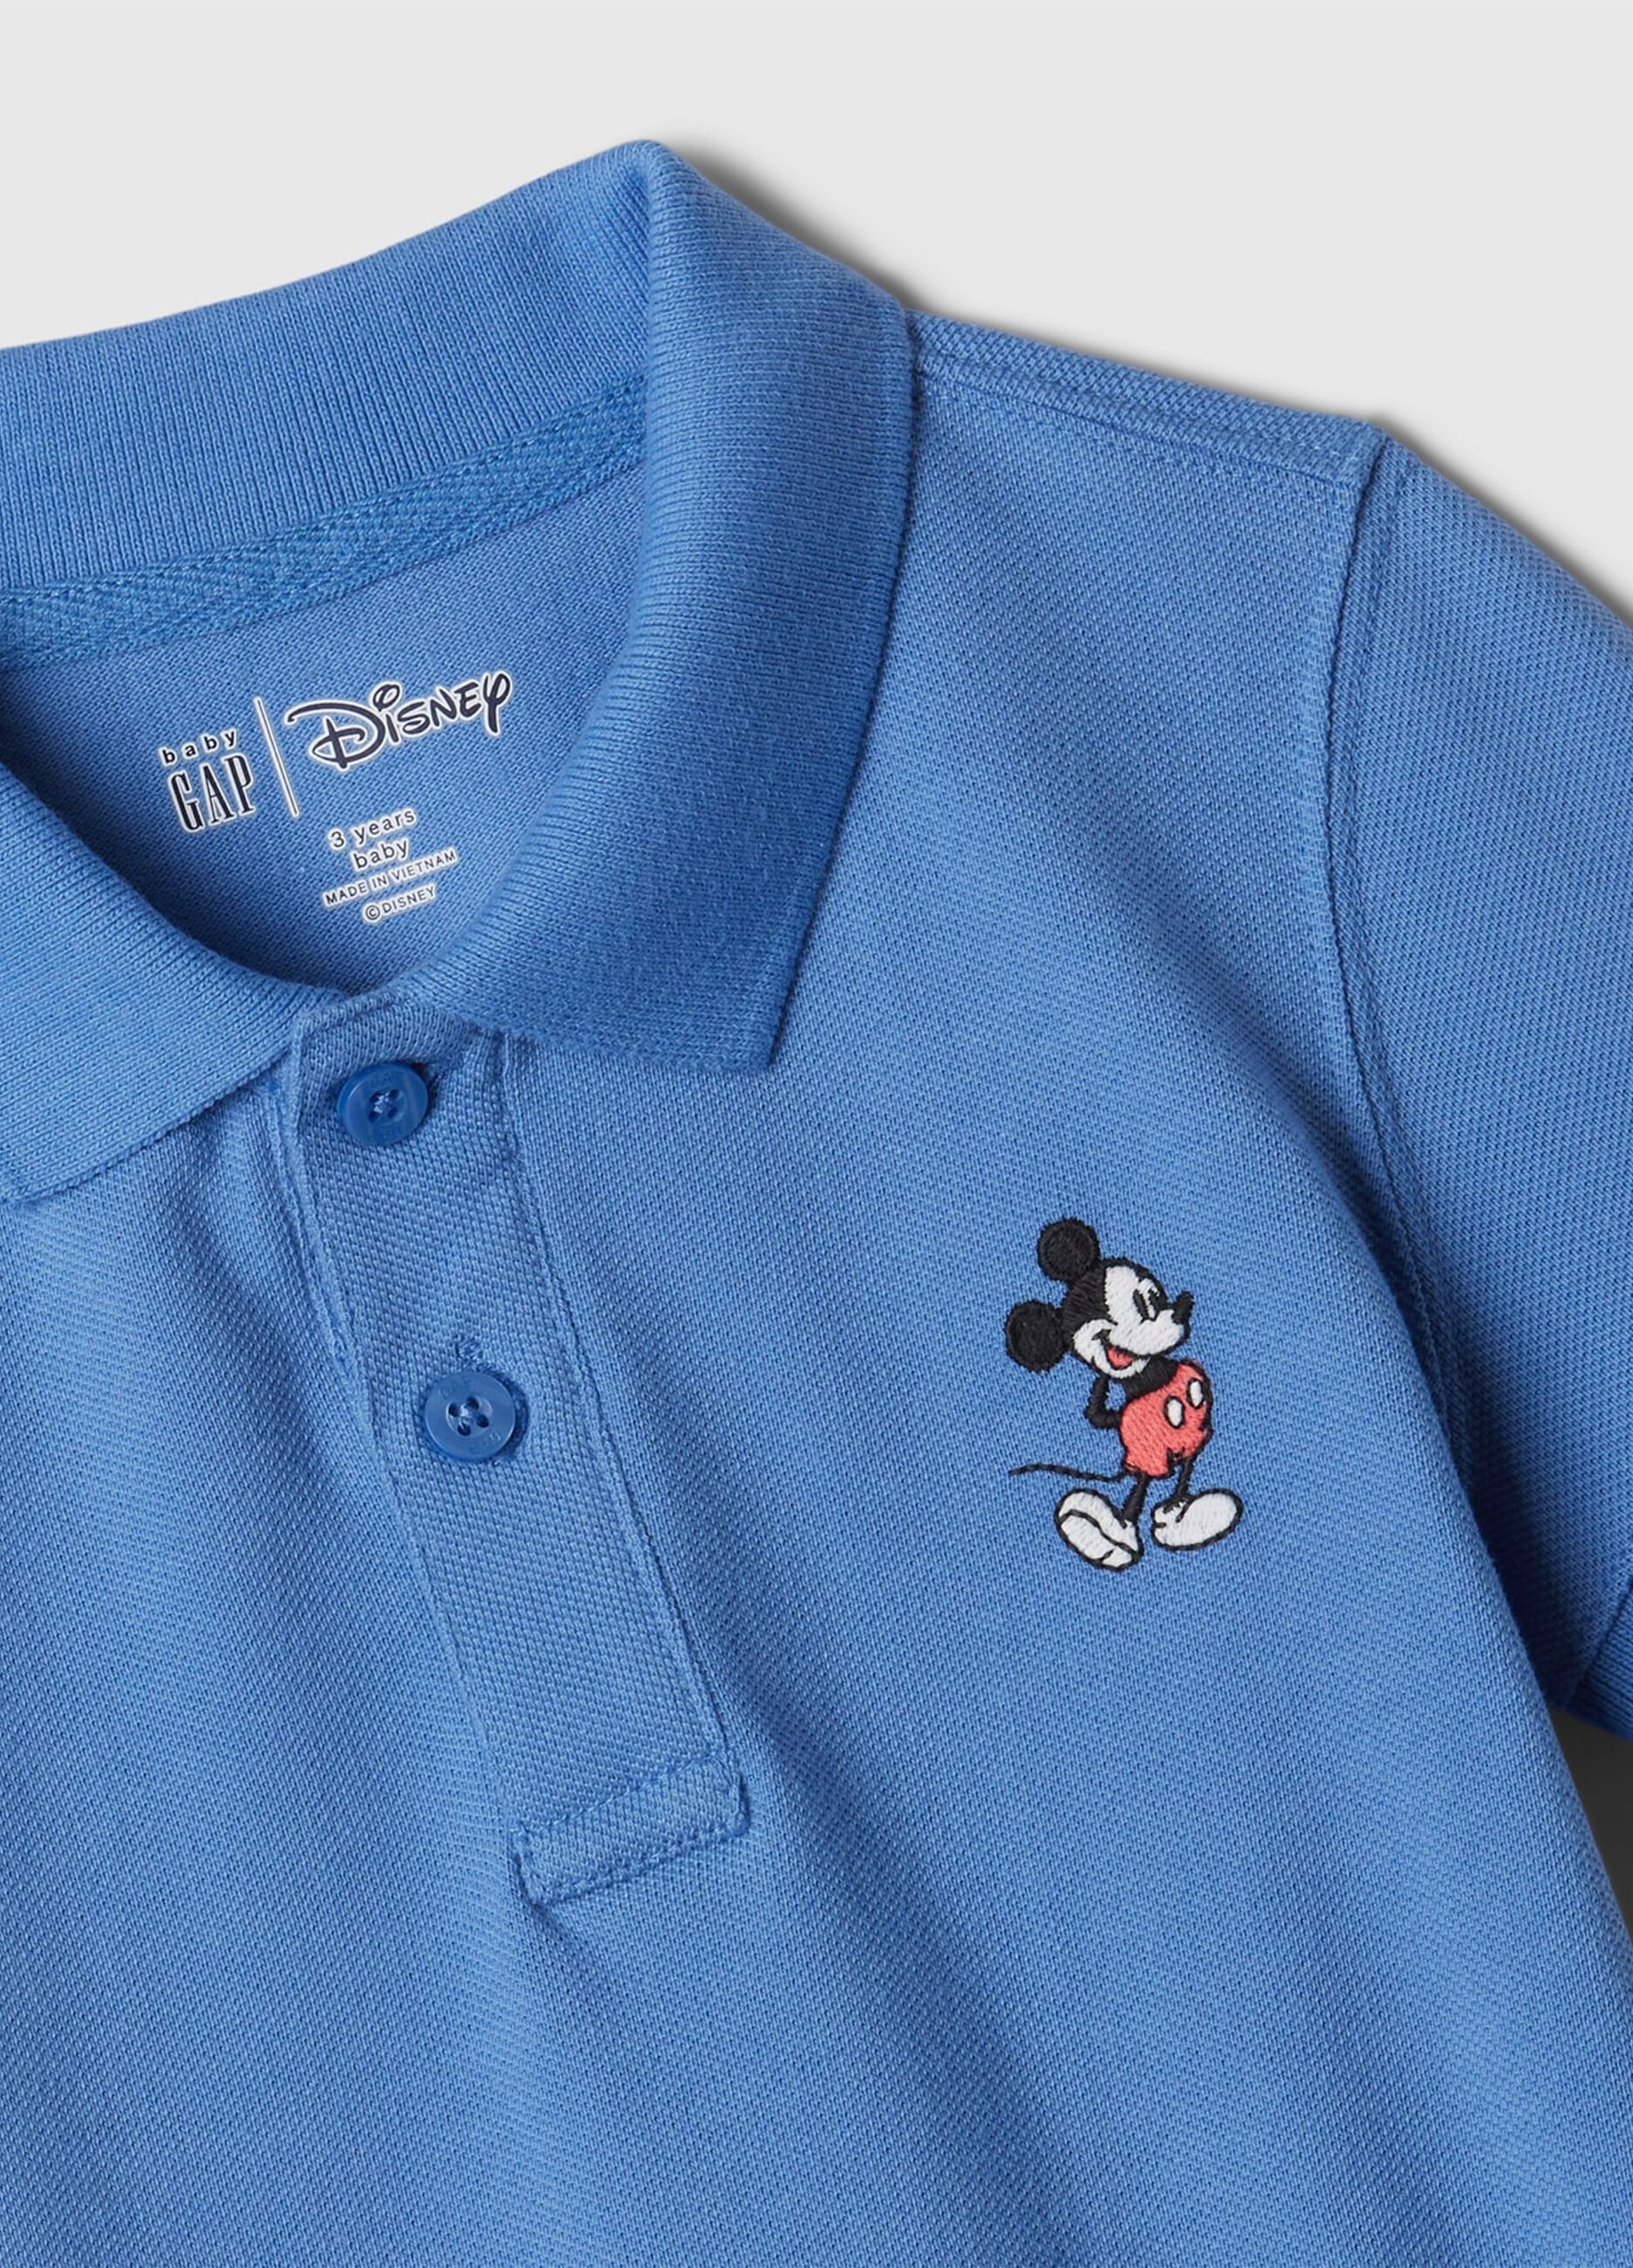 Piquet polo shirt with Disney Mickey Mouse embroidery